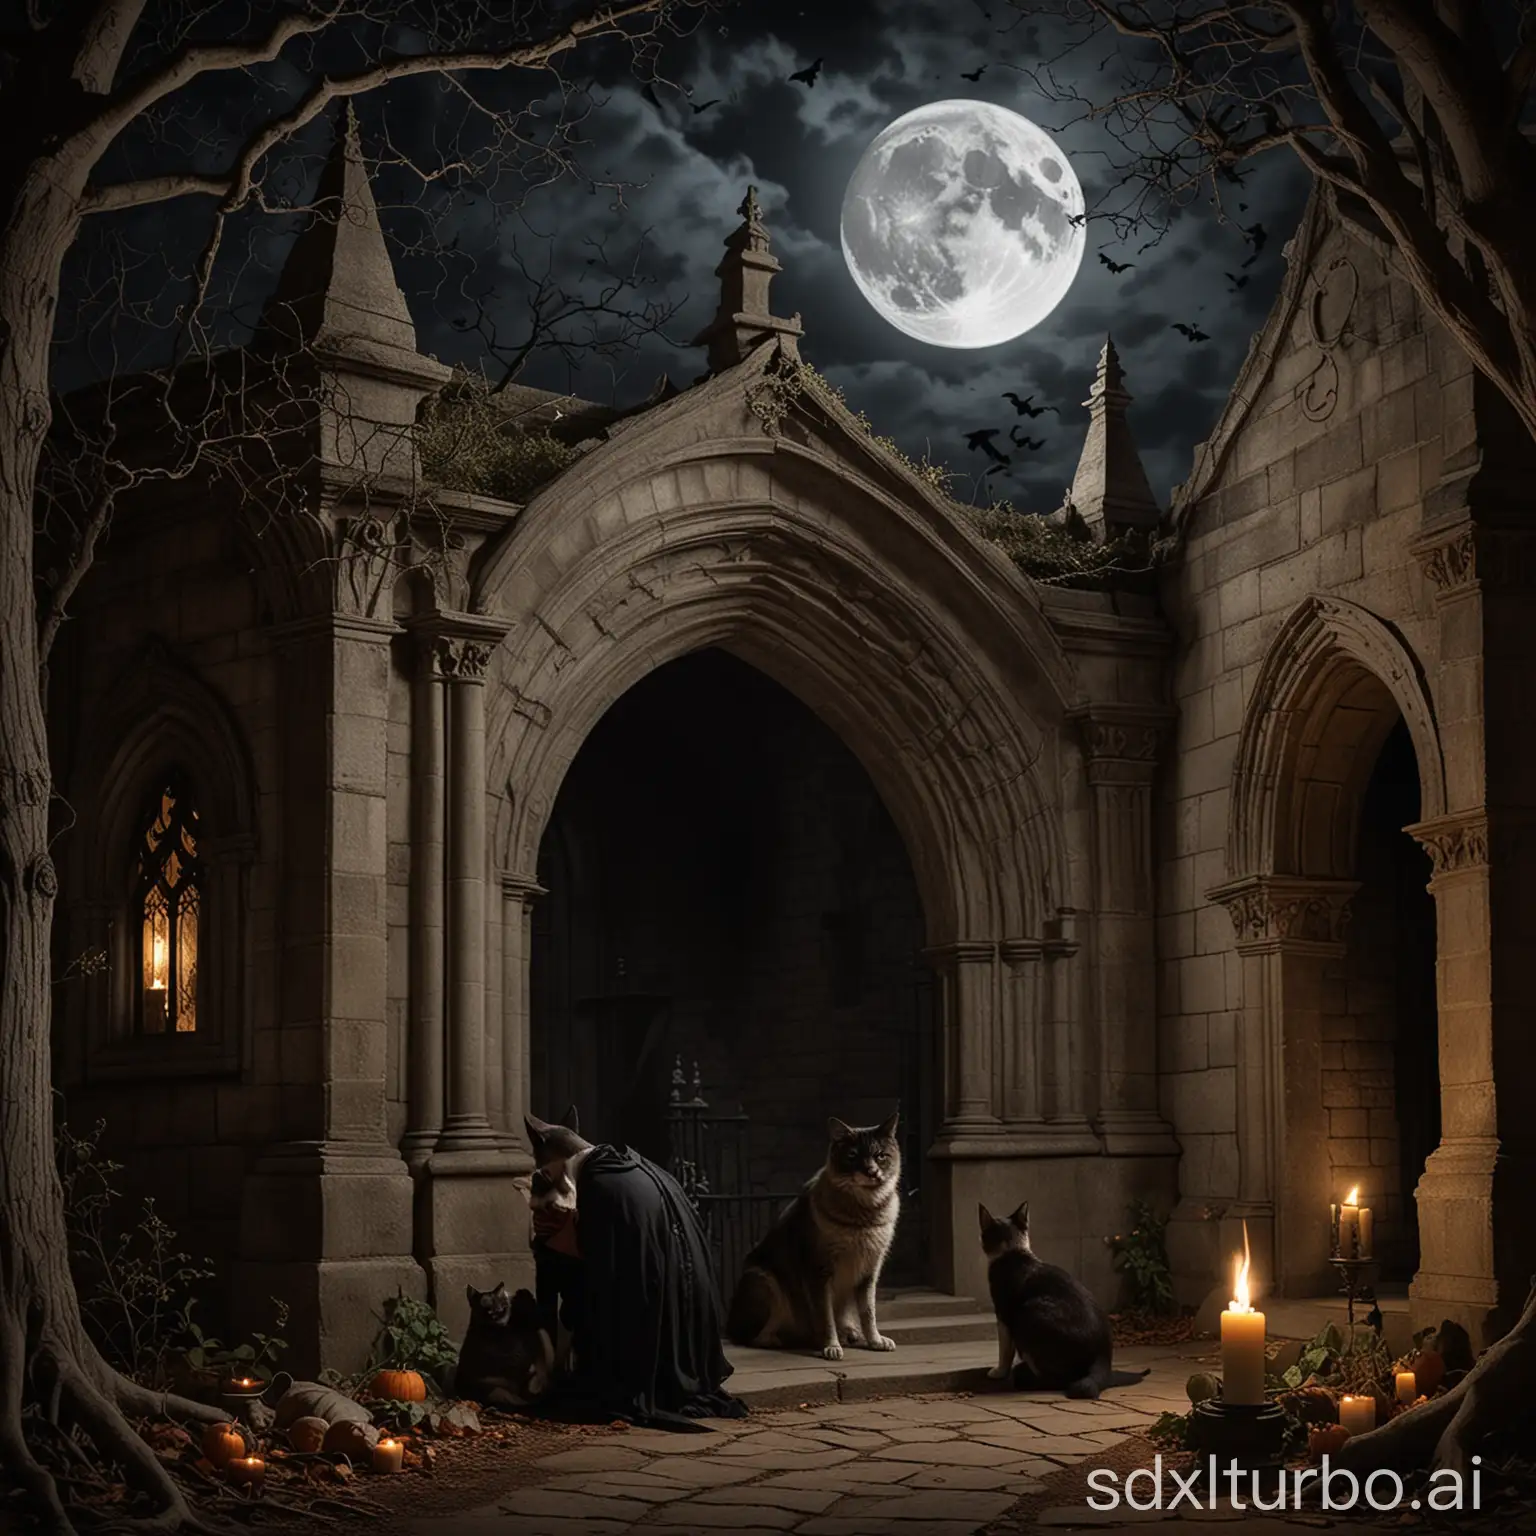 Romantic-Gothic-Couple-at-Moonlit-Crypt-with-Cat-Dog-and-Vampire